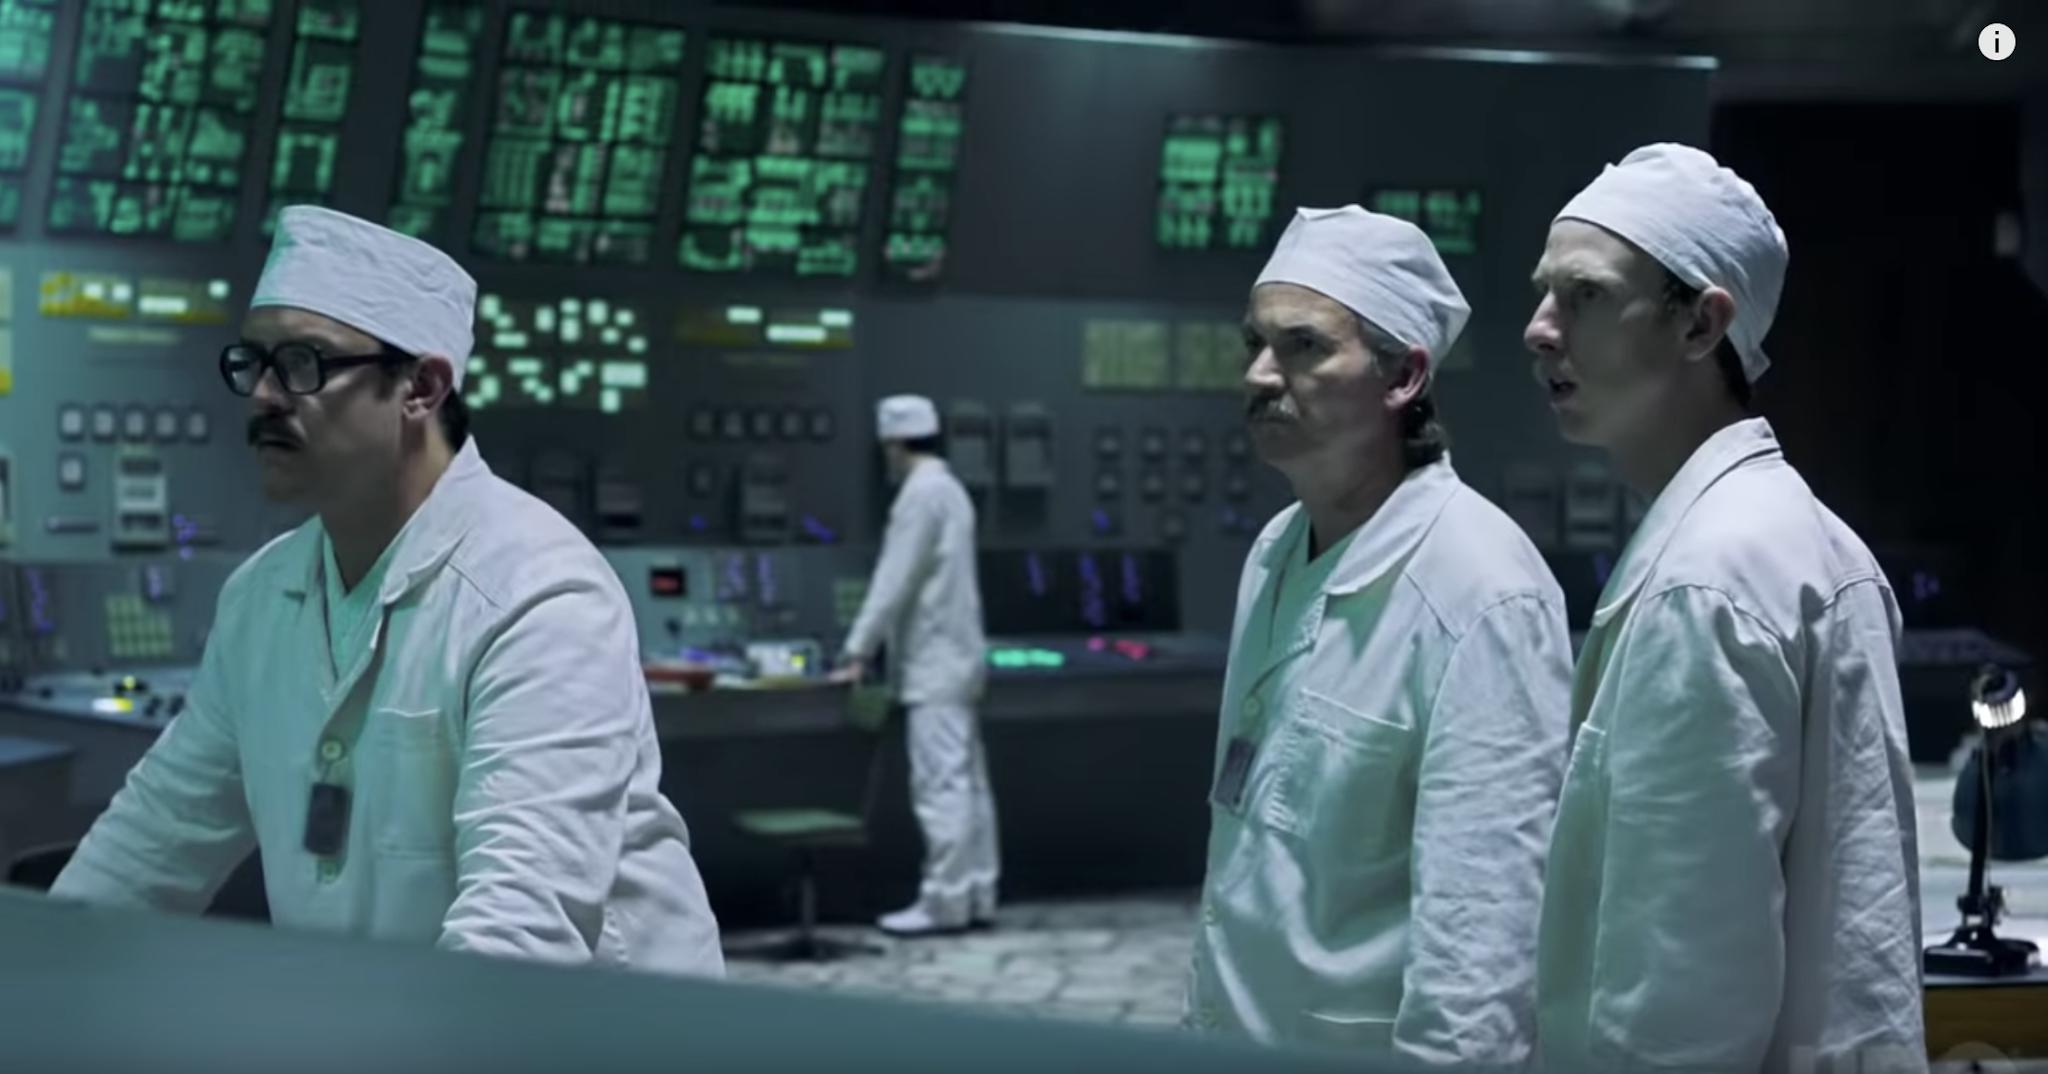 New image from HBO's short series 'Chernobyl'